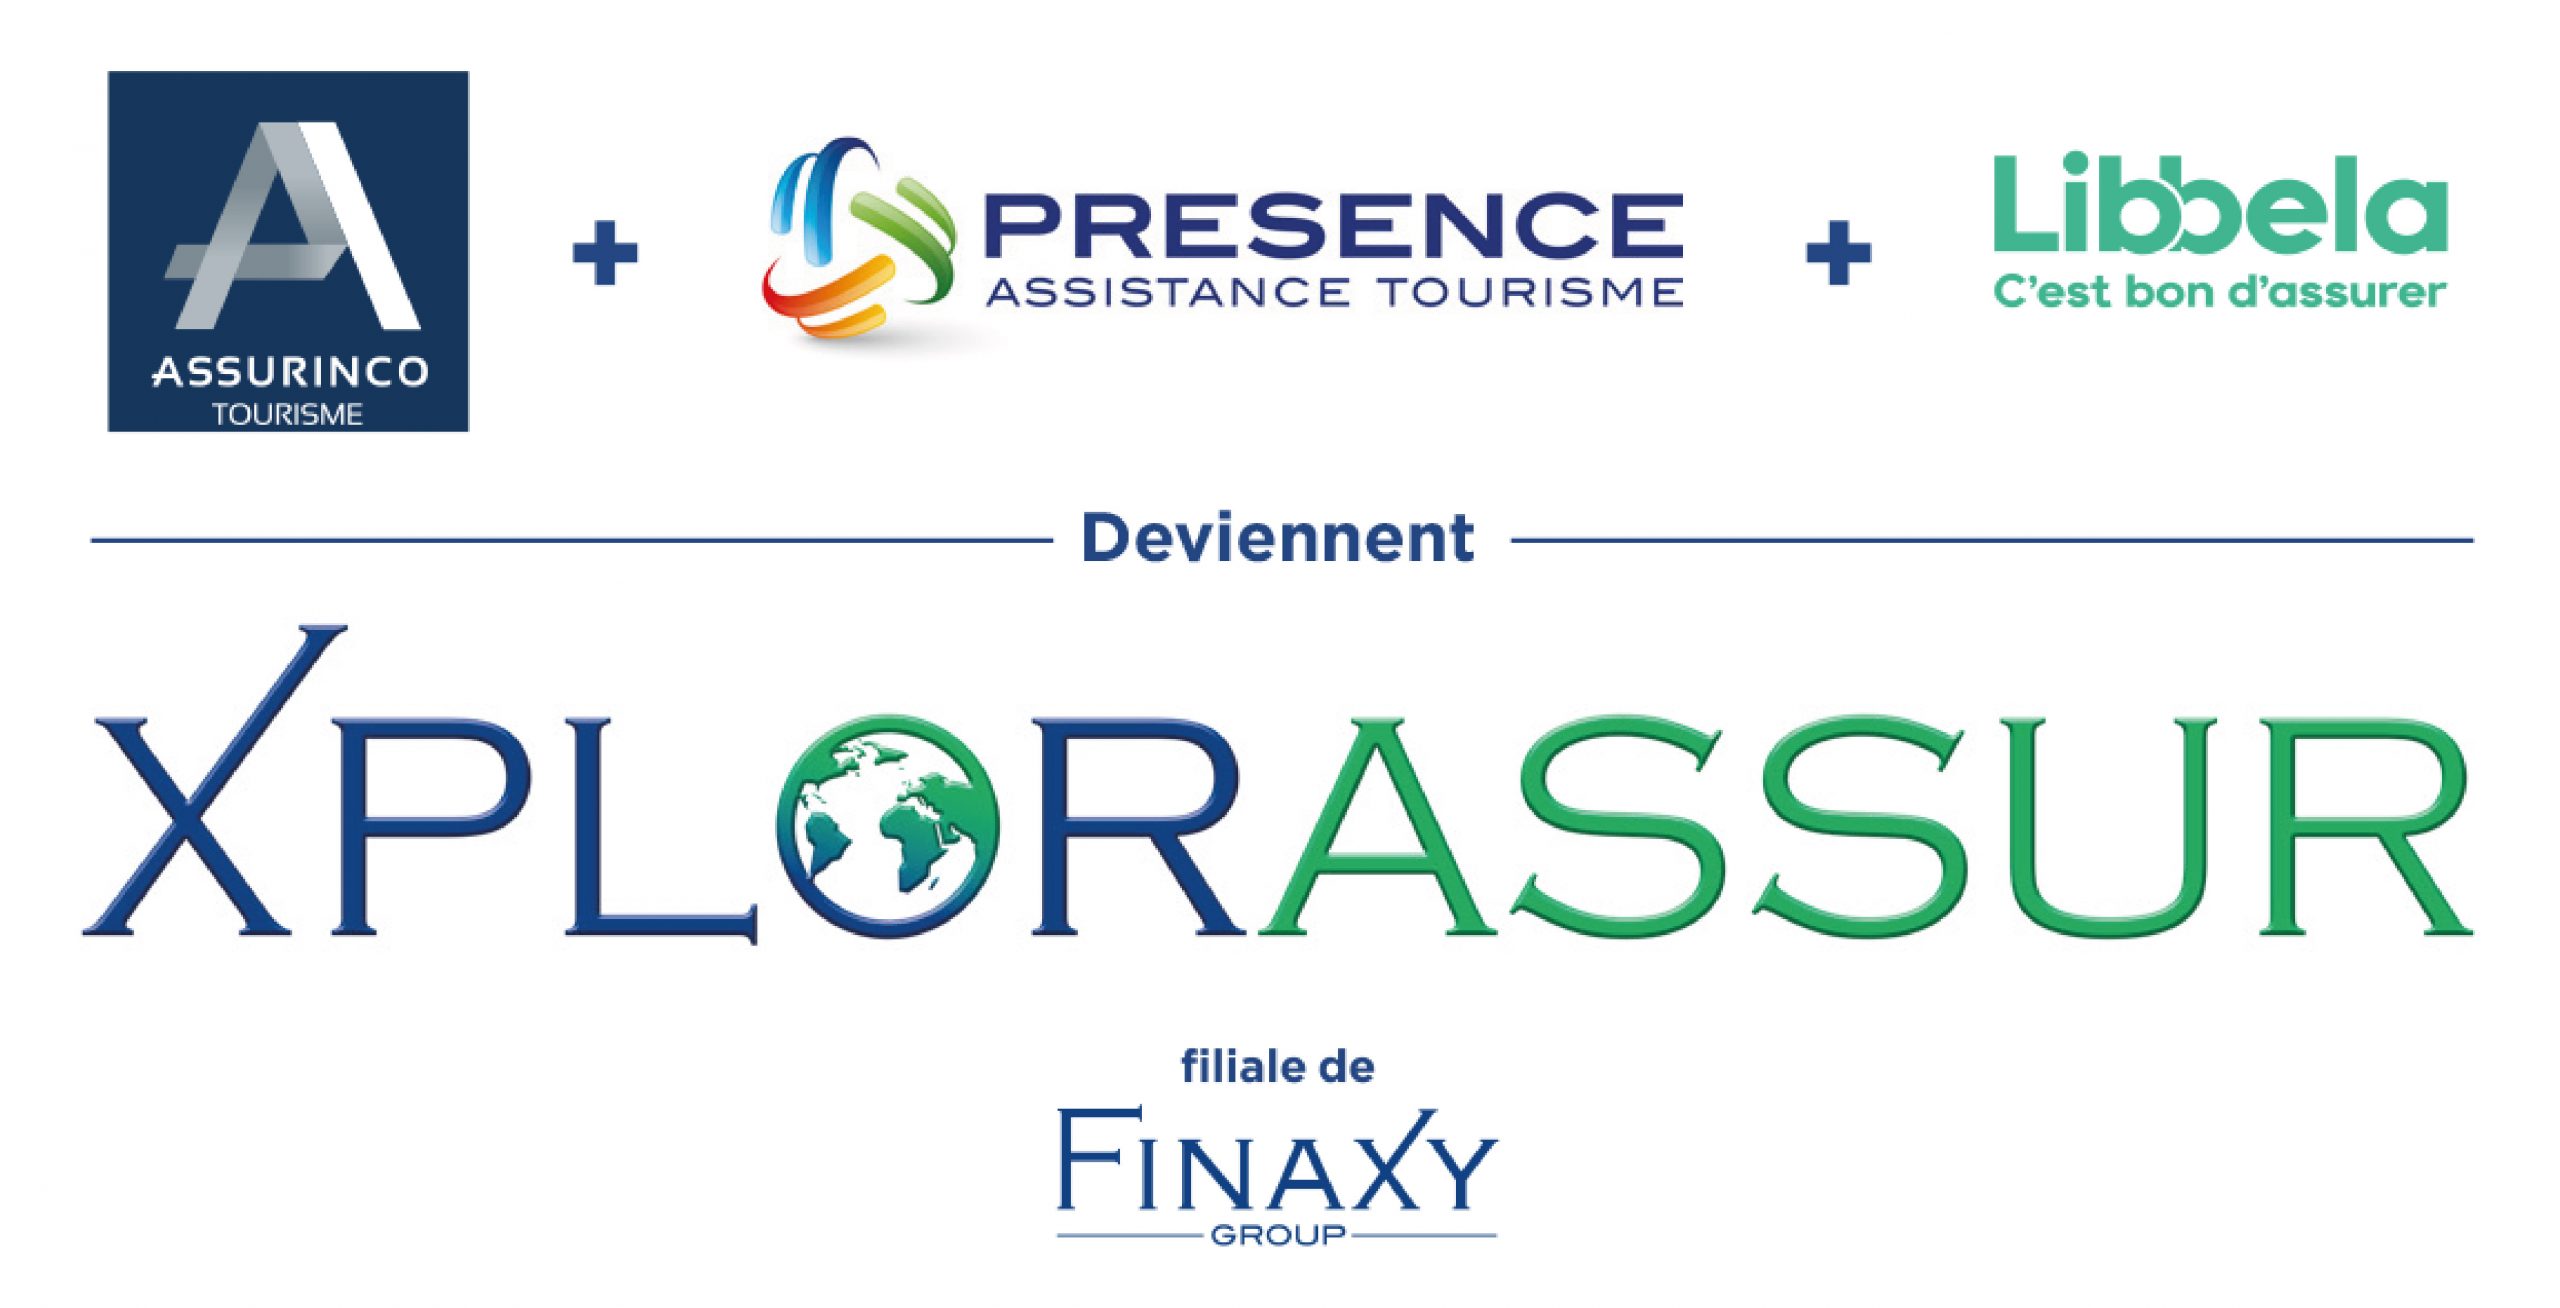 NewCo Corporate Finance advises on the merger between Assurinco, Présence Assistance Tourisme and Libbela under the sponsorship of Finaxy Group